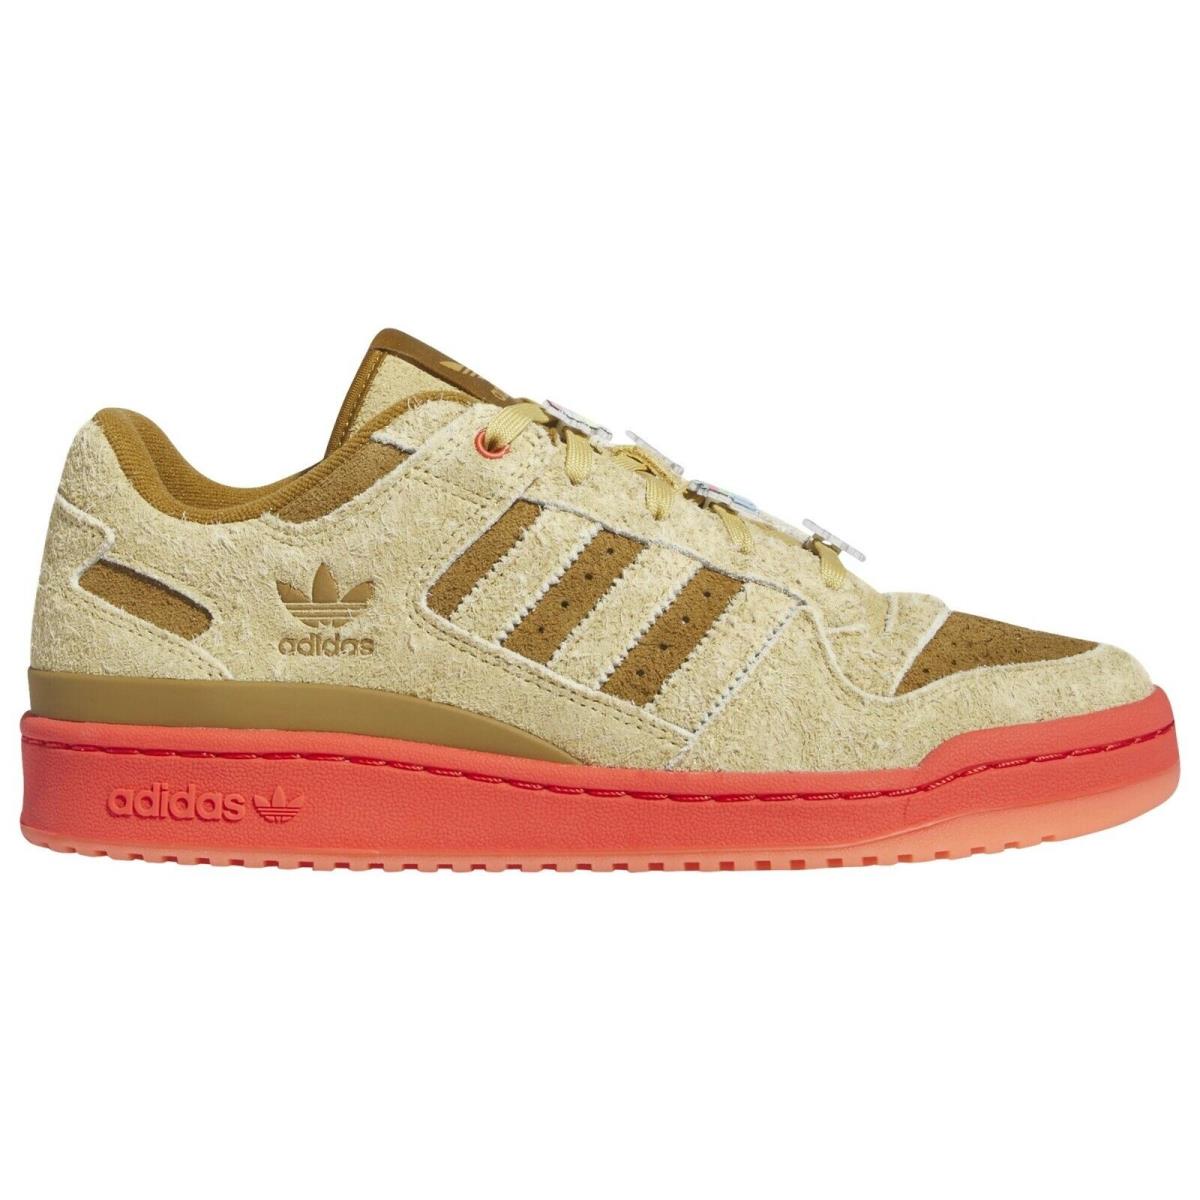 Adidas Originals Forum Low Classic x The Grinch Men`s Sneakers Casual Shoes - Beige, Manufacturer: Bright Red/Oat